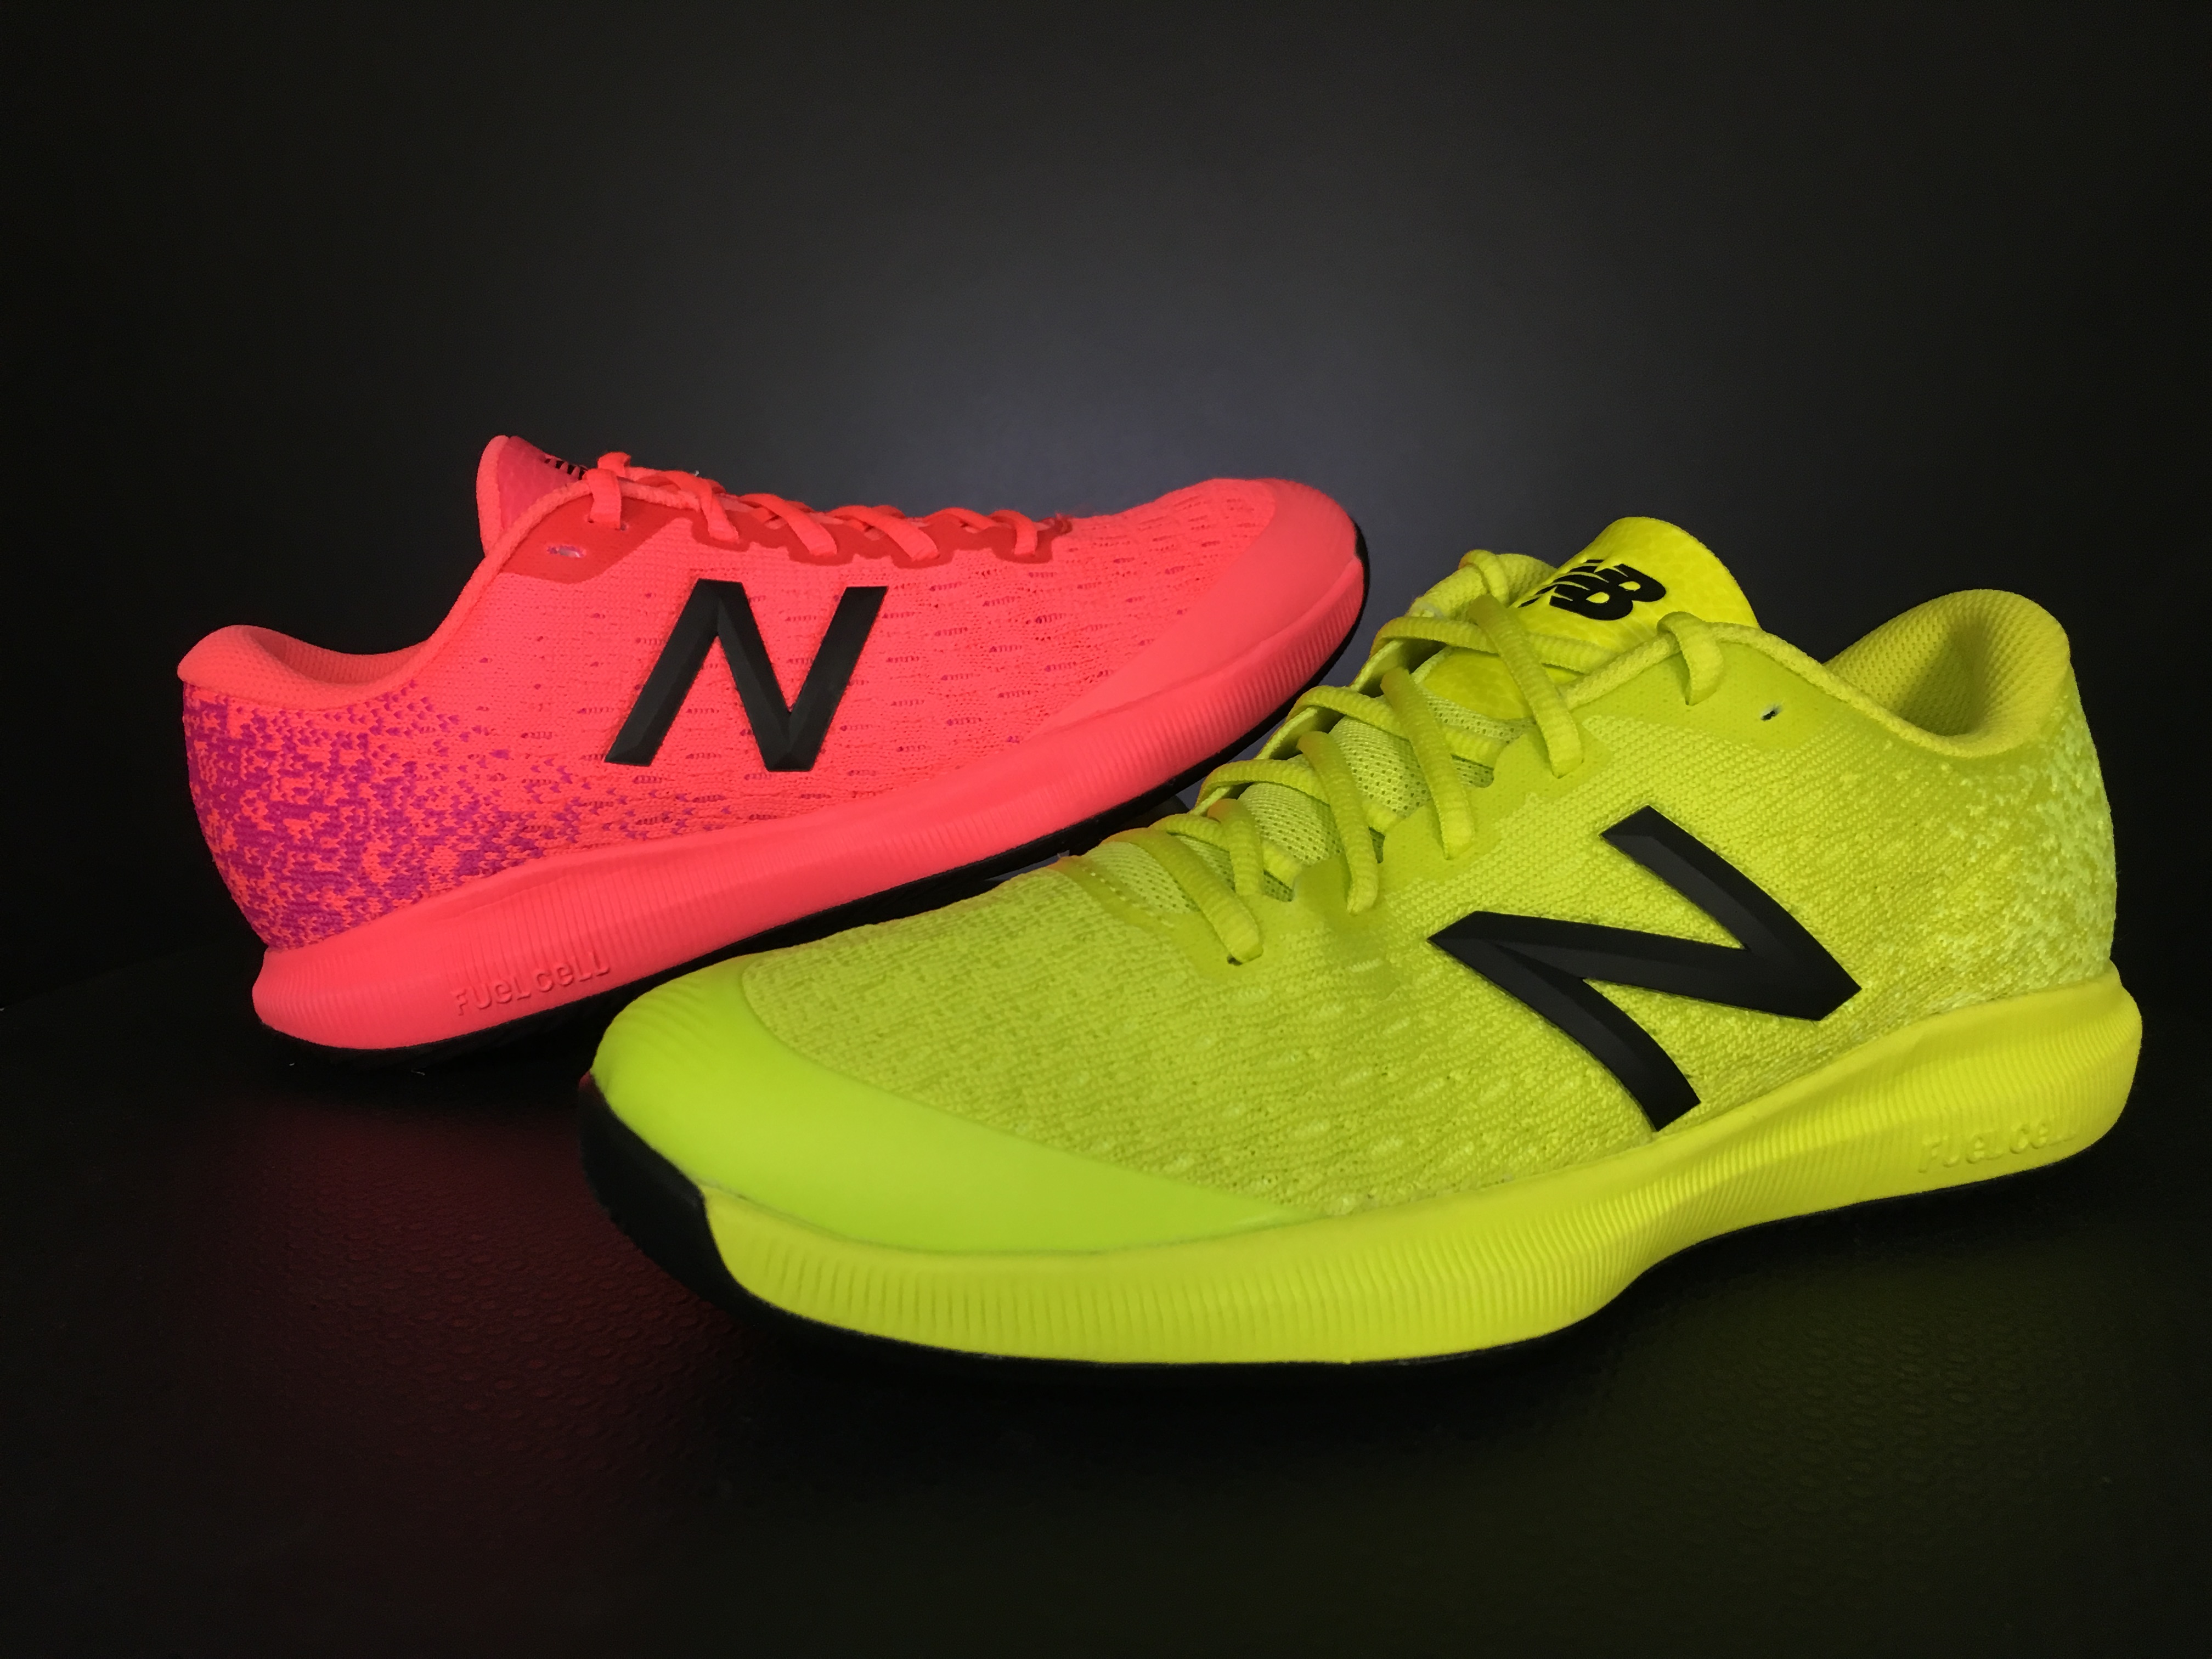 New Balance's FuelCell Comes to Tennis in the 996v4 - TENNIS ...